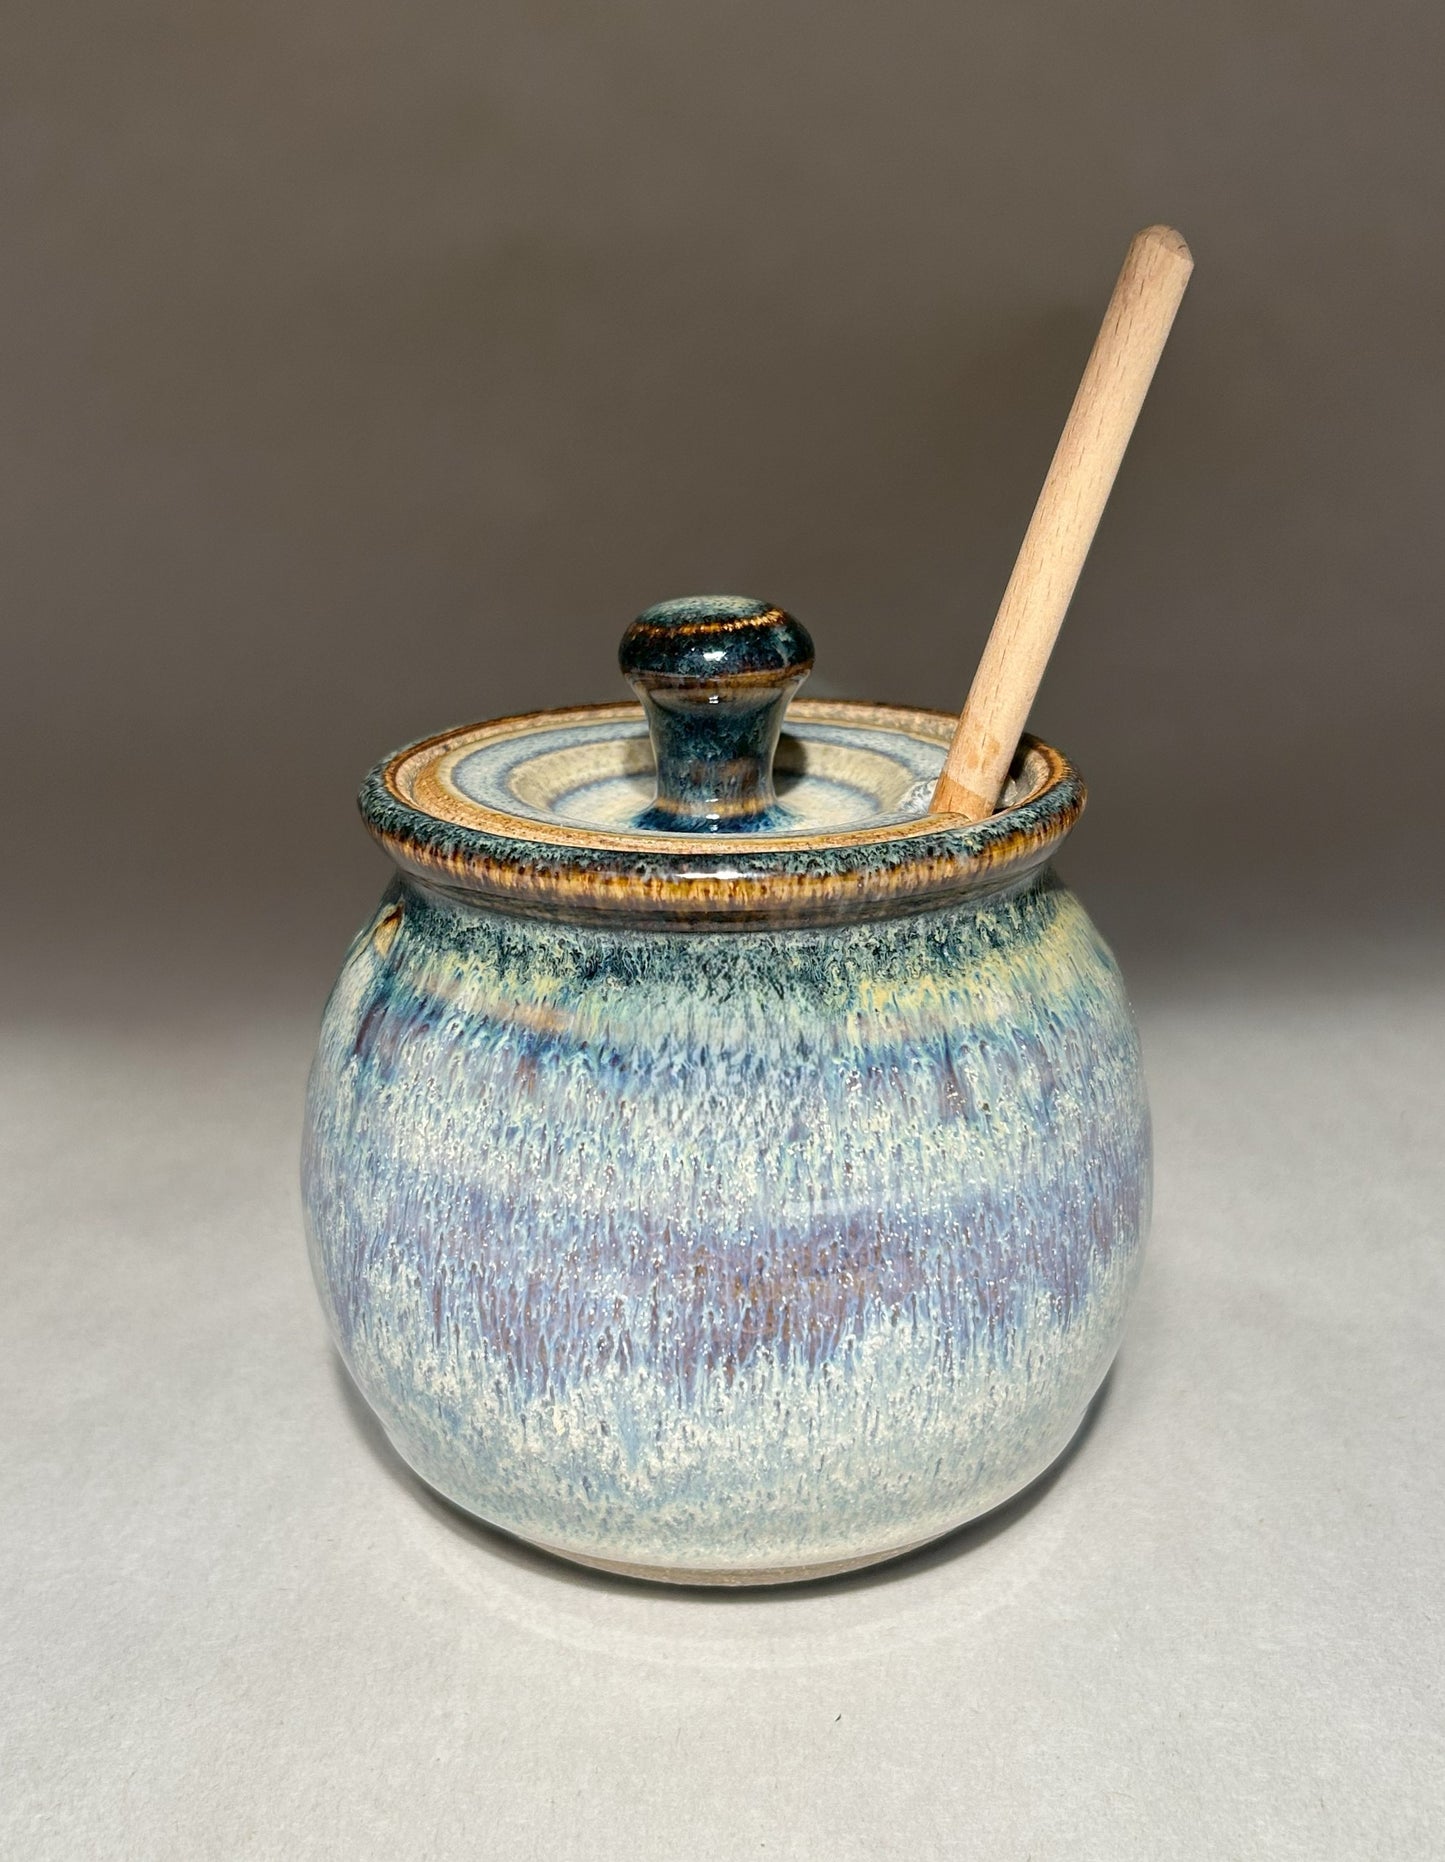 Handmade Pottery Honey Pot: Rustic Elegance for Your Kitchen